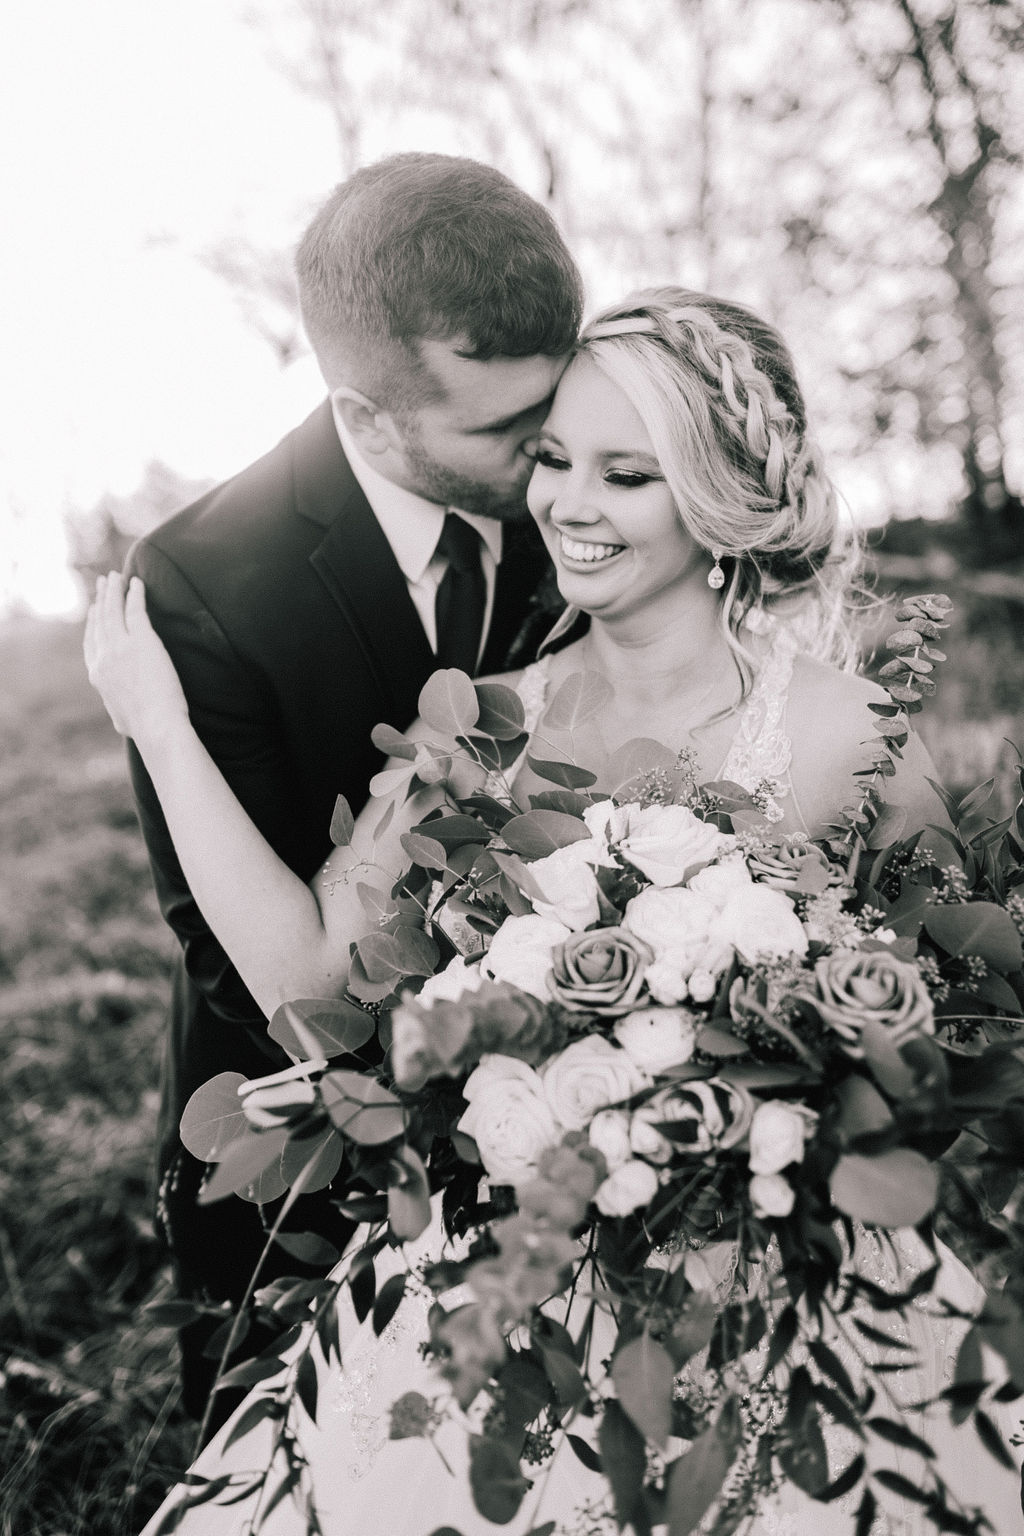 black and white image of bride and groom in a field for their destination wedding with the groom standing behind the bride as he kisses her cheek and the bride smiles and reaches back for him